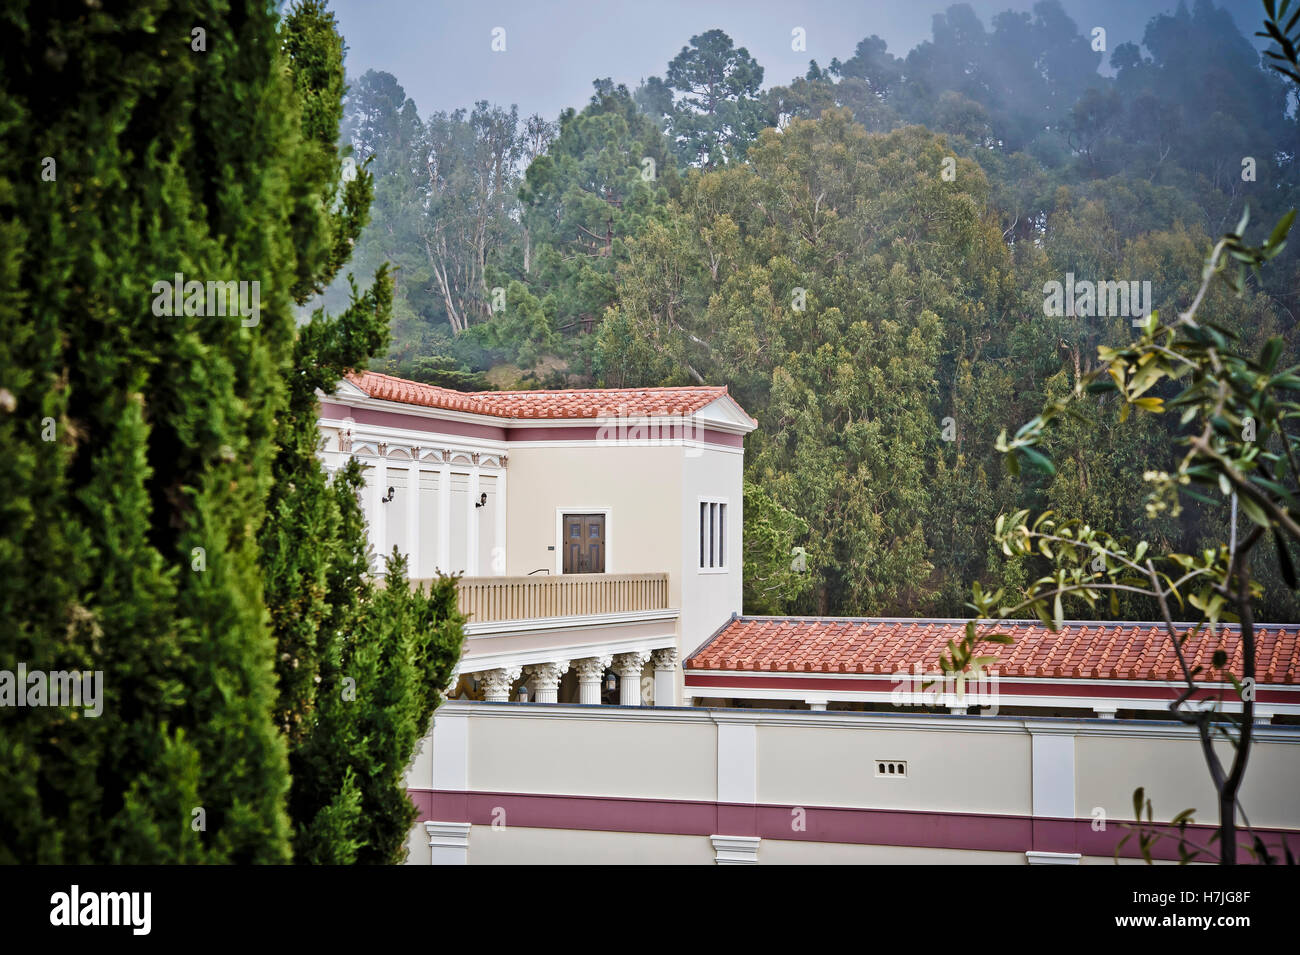 J. Paul Getty villa in Los Angeles turned into museum keeping the ancient Roman art collection Stock Photo